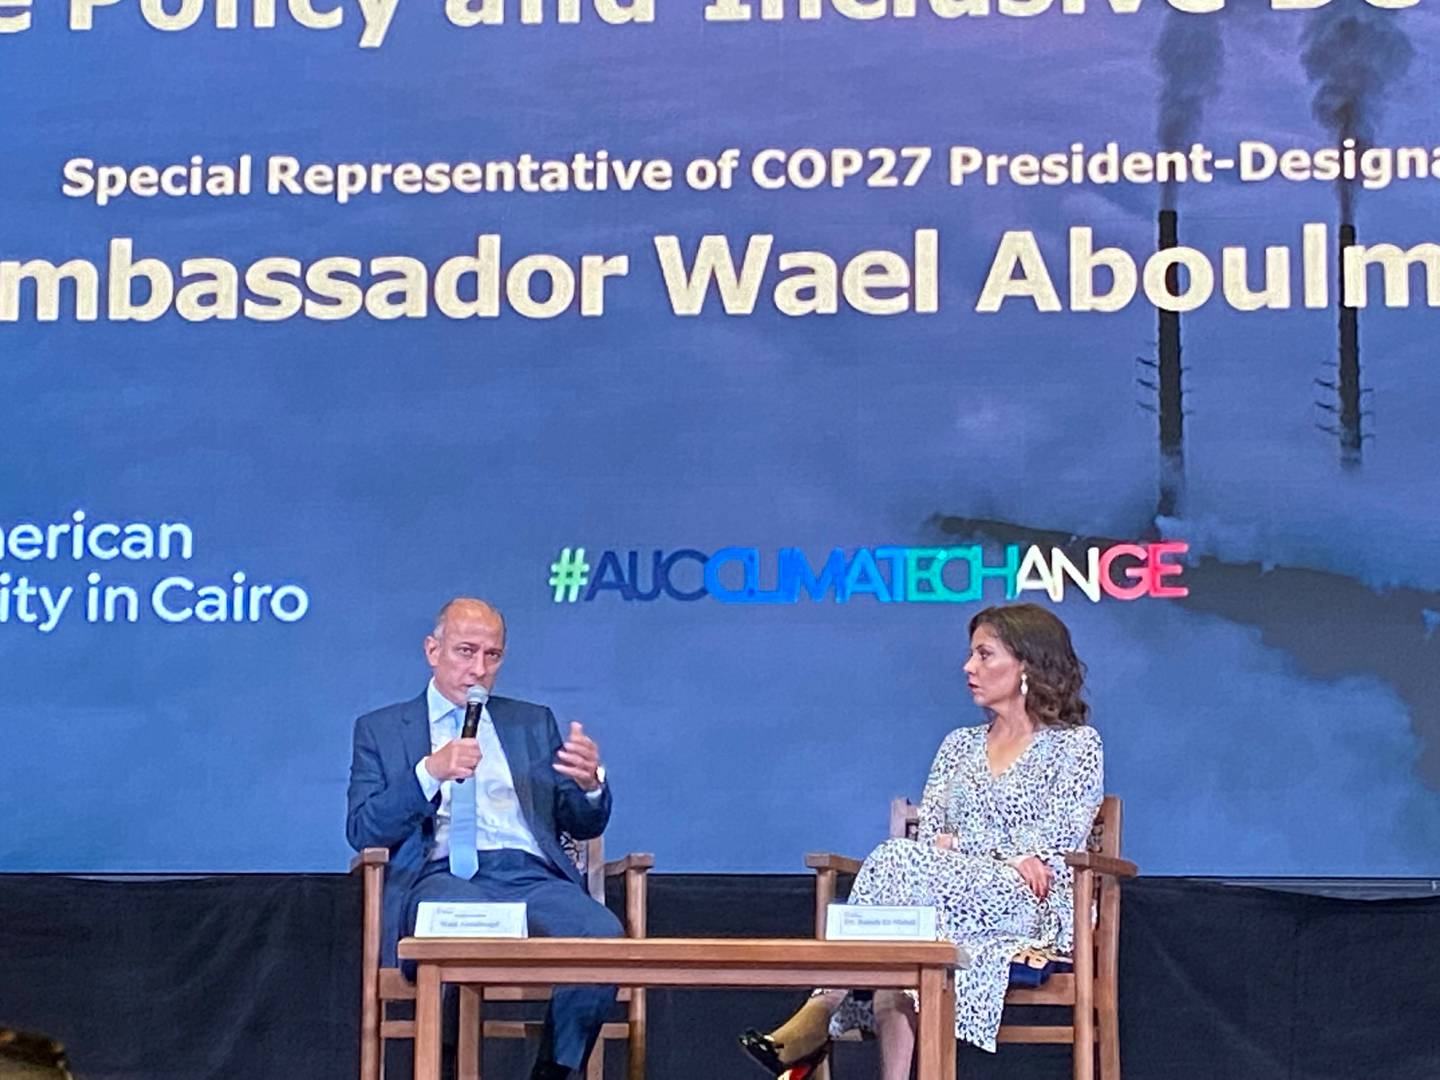 Ambassador Wael Aboulmagd, special representative of the Cop27 president, at a talk held at the American University in Cairo on Monday. Nada El Sawy / The National